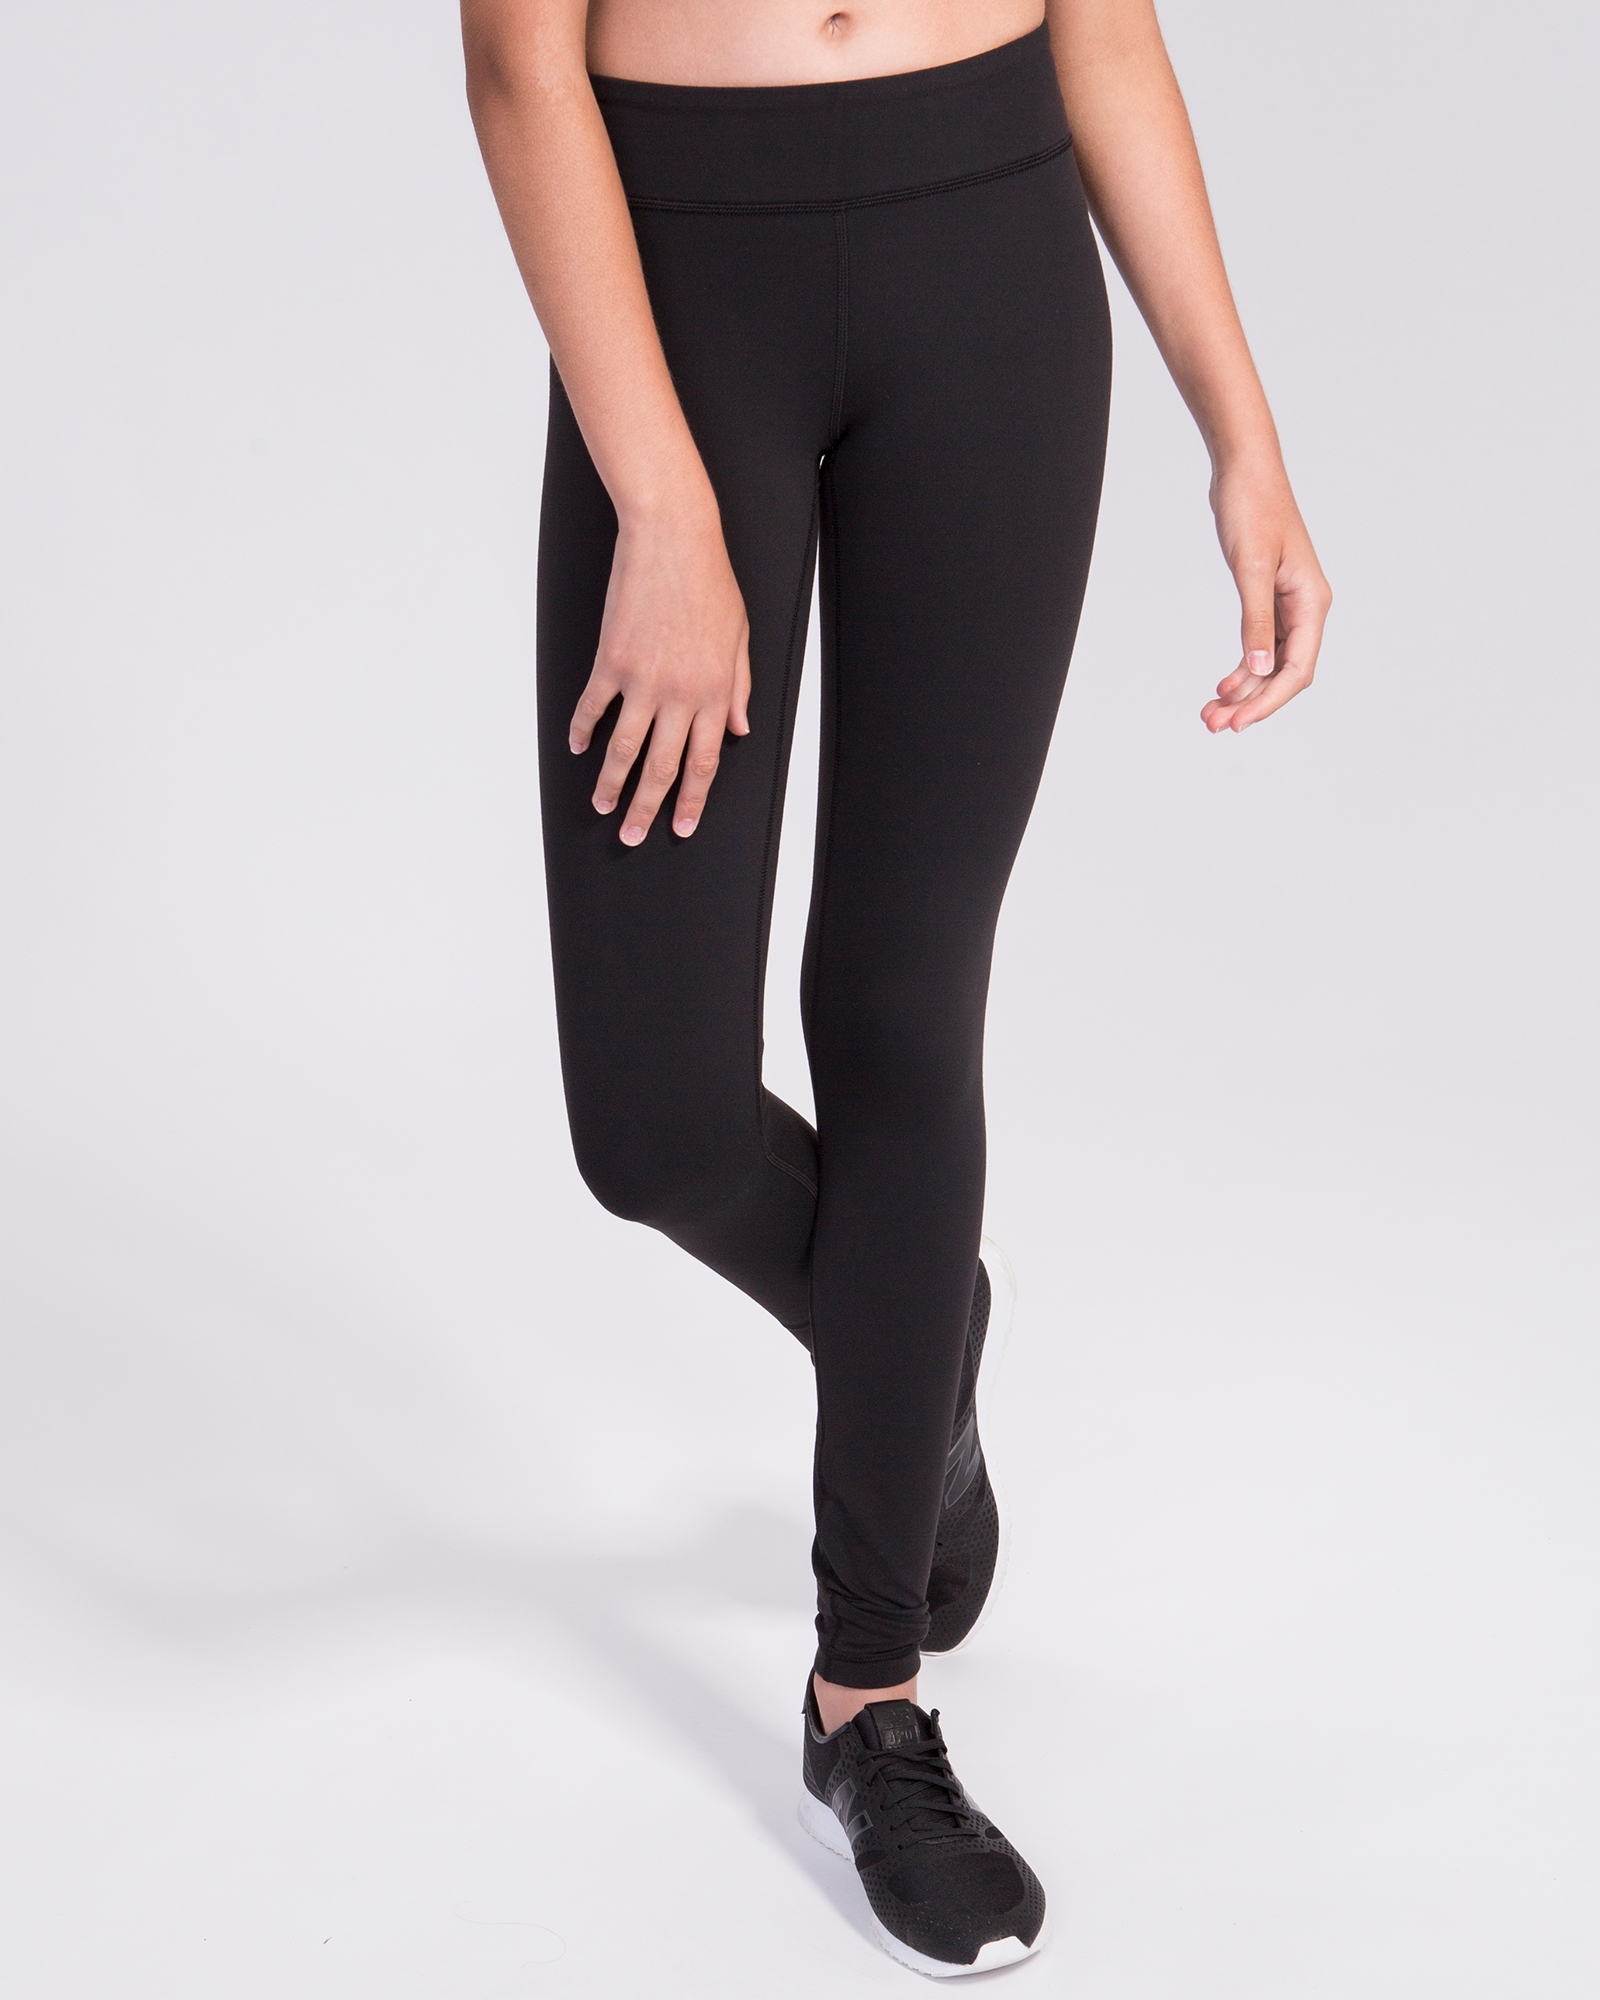 Ivivva by Lululemon Cropped Leggings with Mesh Detail Girls Size